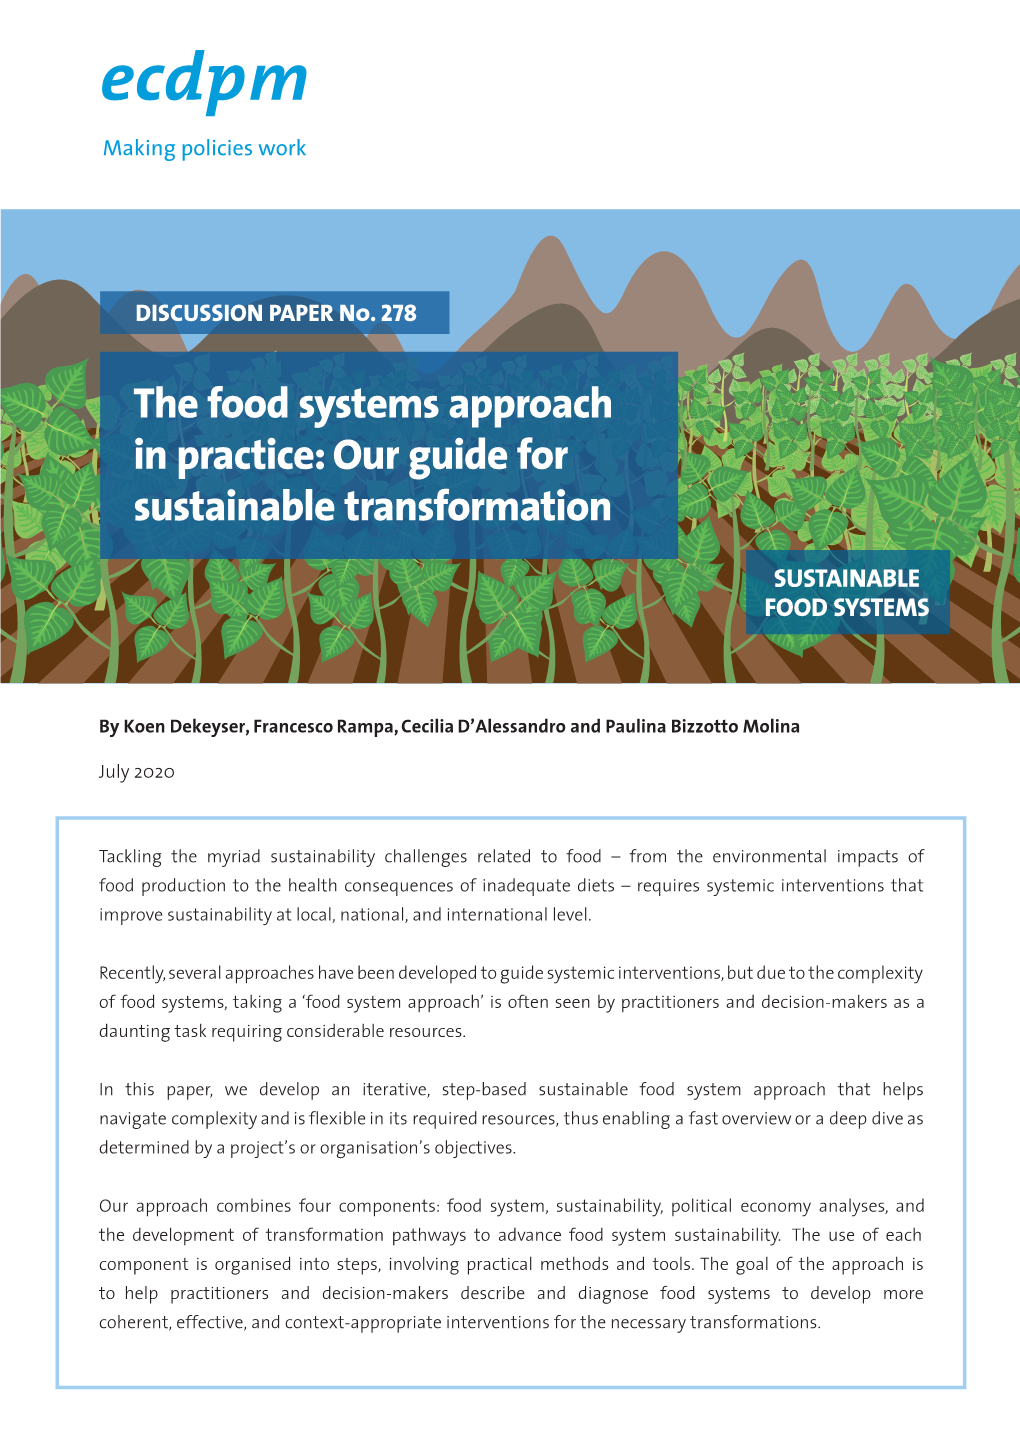 The Food Systems Approach in Practice: Our Guide for Sustainable Transformation